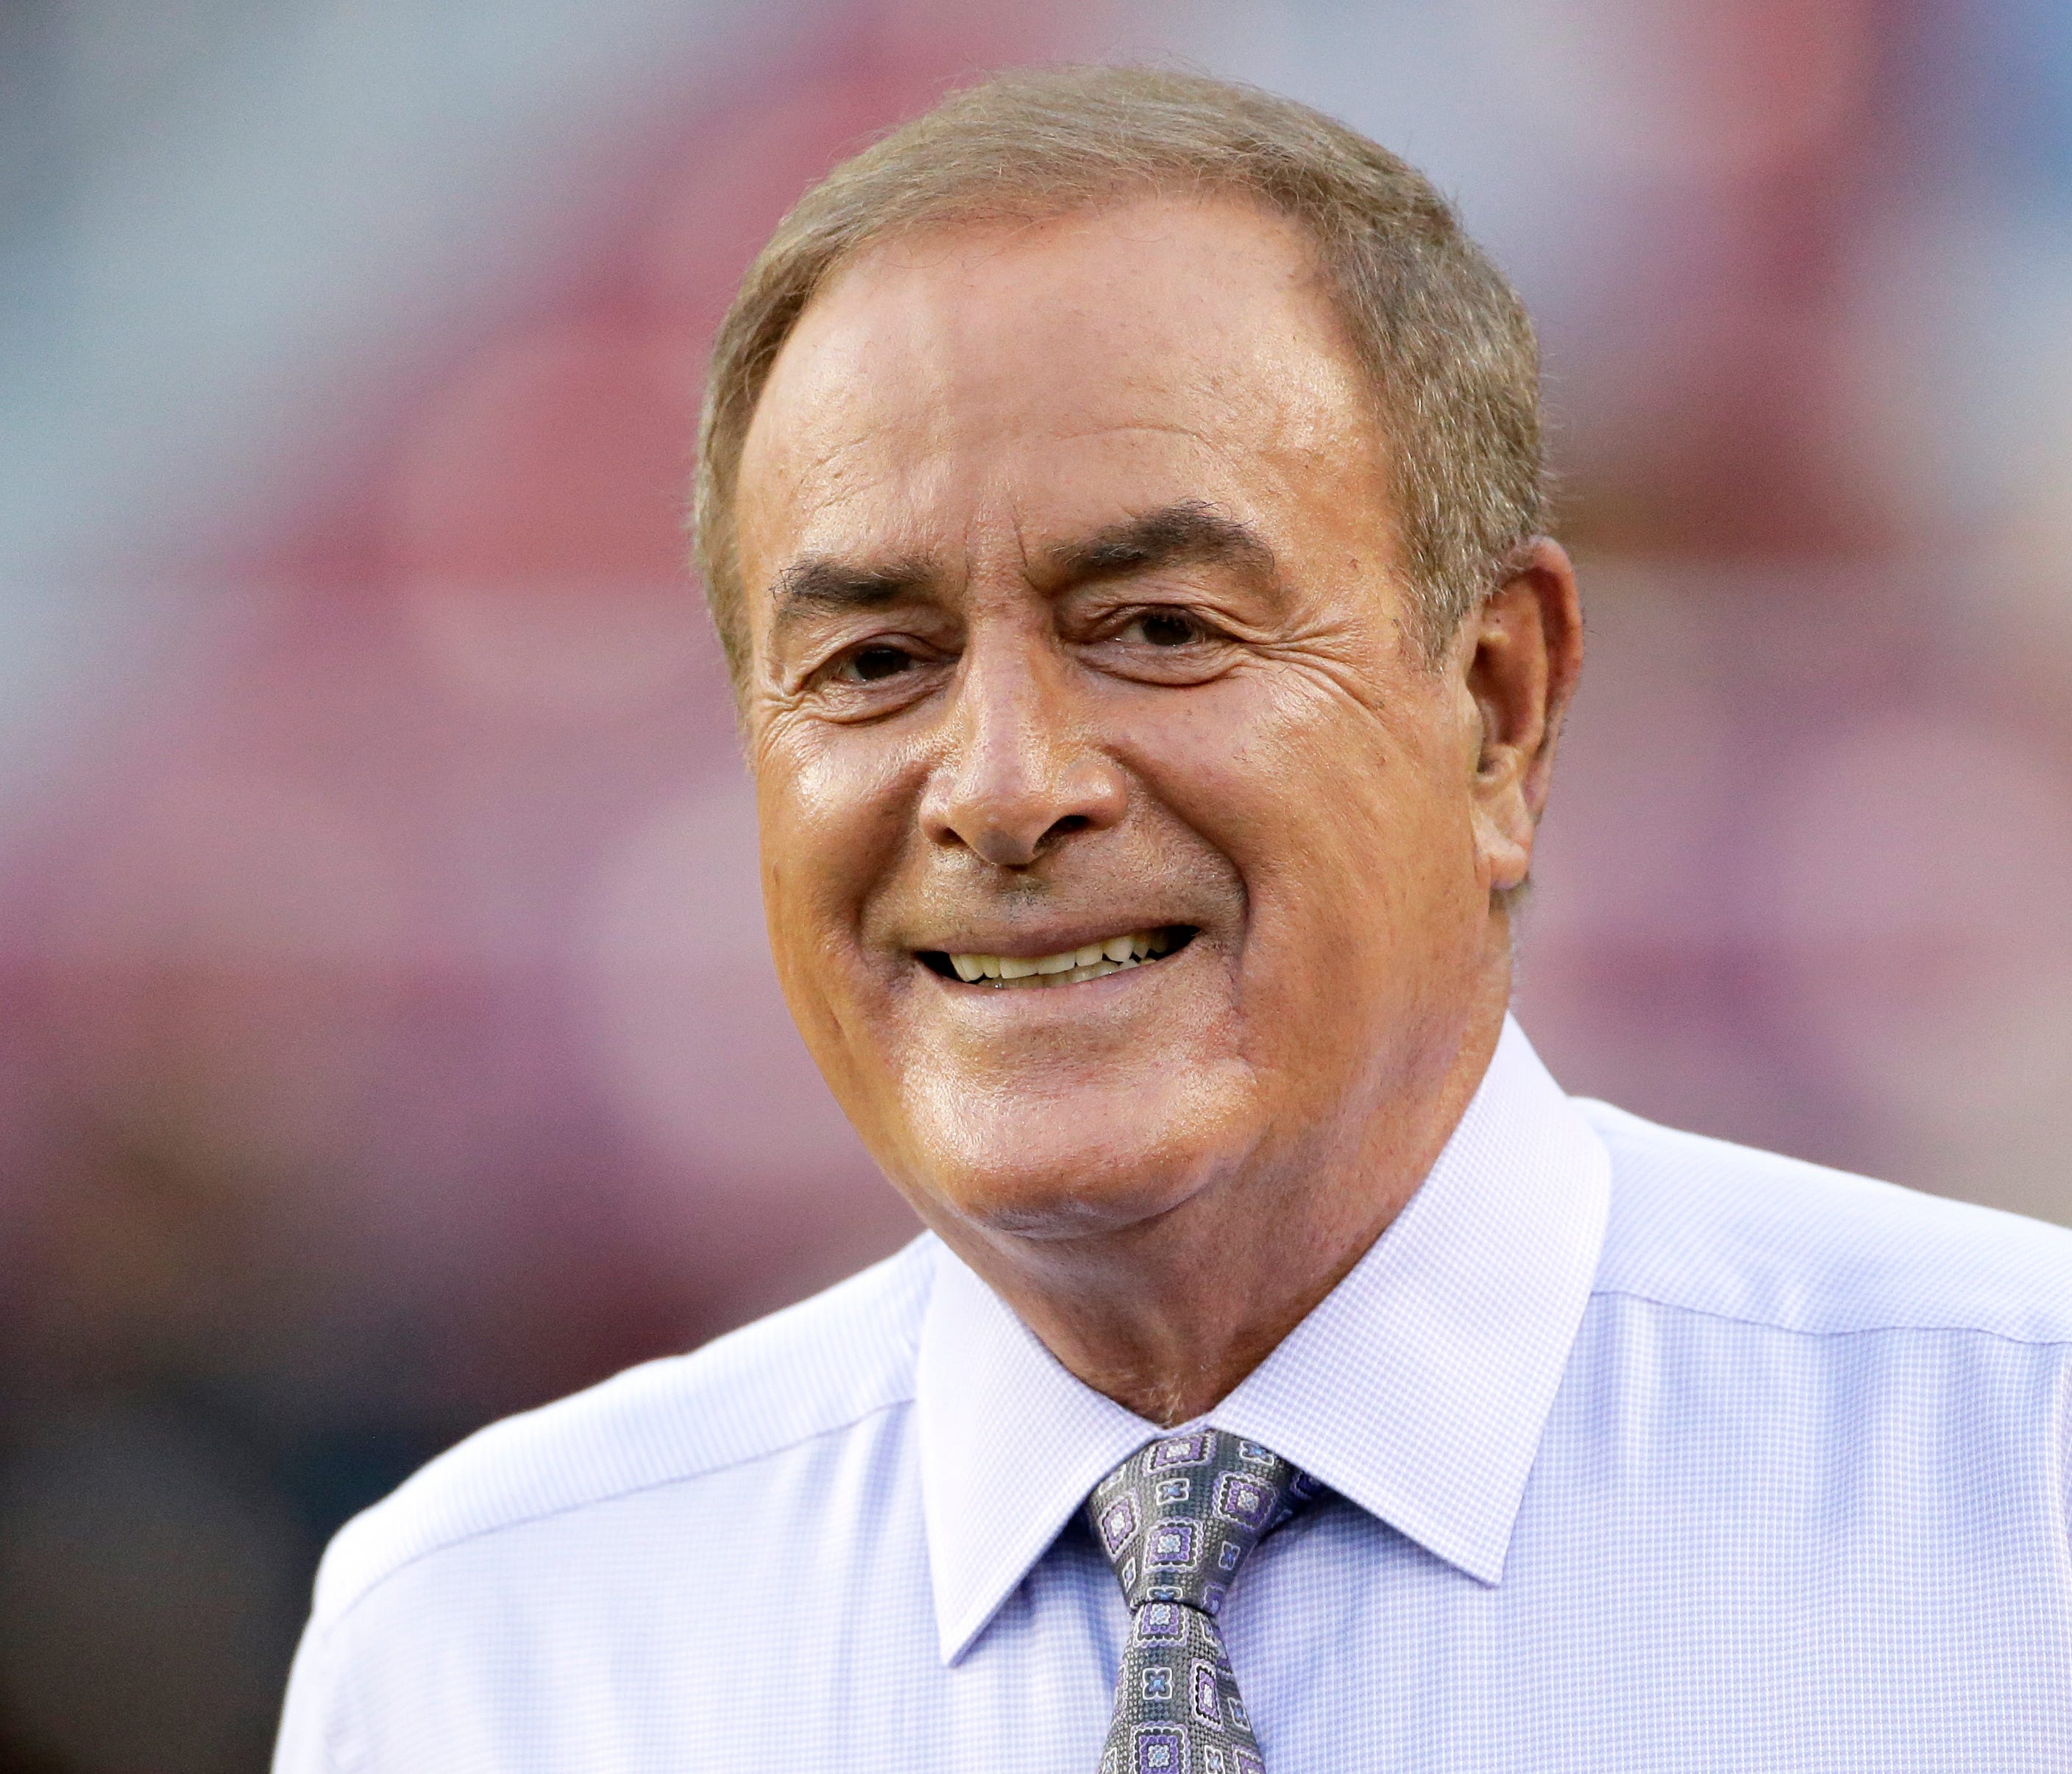 Al Michaels walks onto the field prior to an NFL football game between the Oakland Raiders and Washington Redskins, Sunday, Sept. 24, 2017, in Landover, Md. (AP Photo/Mark Tenally) ORG XMIT: OTK113